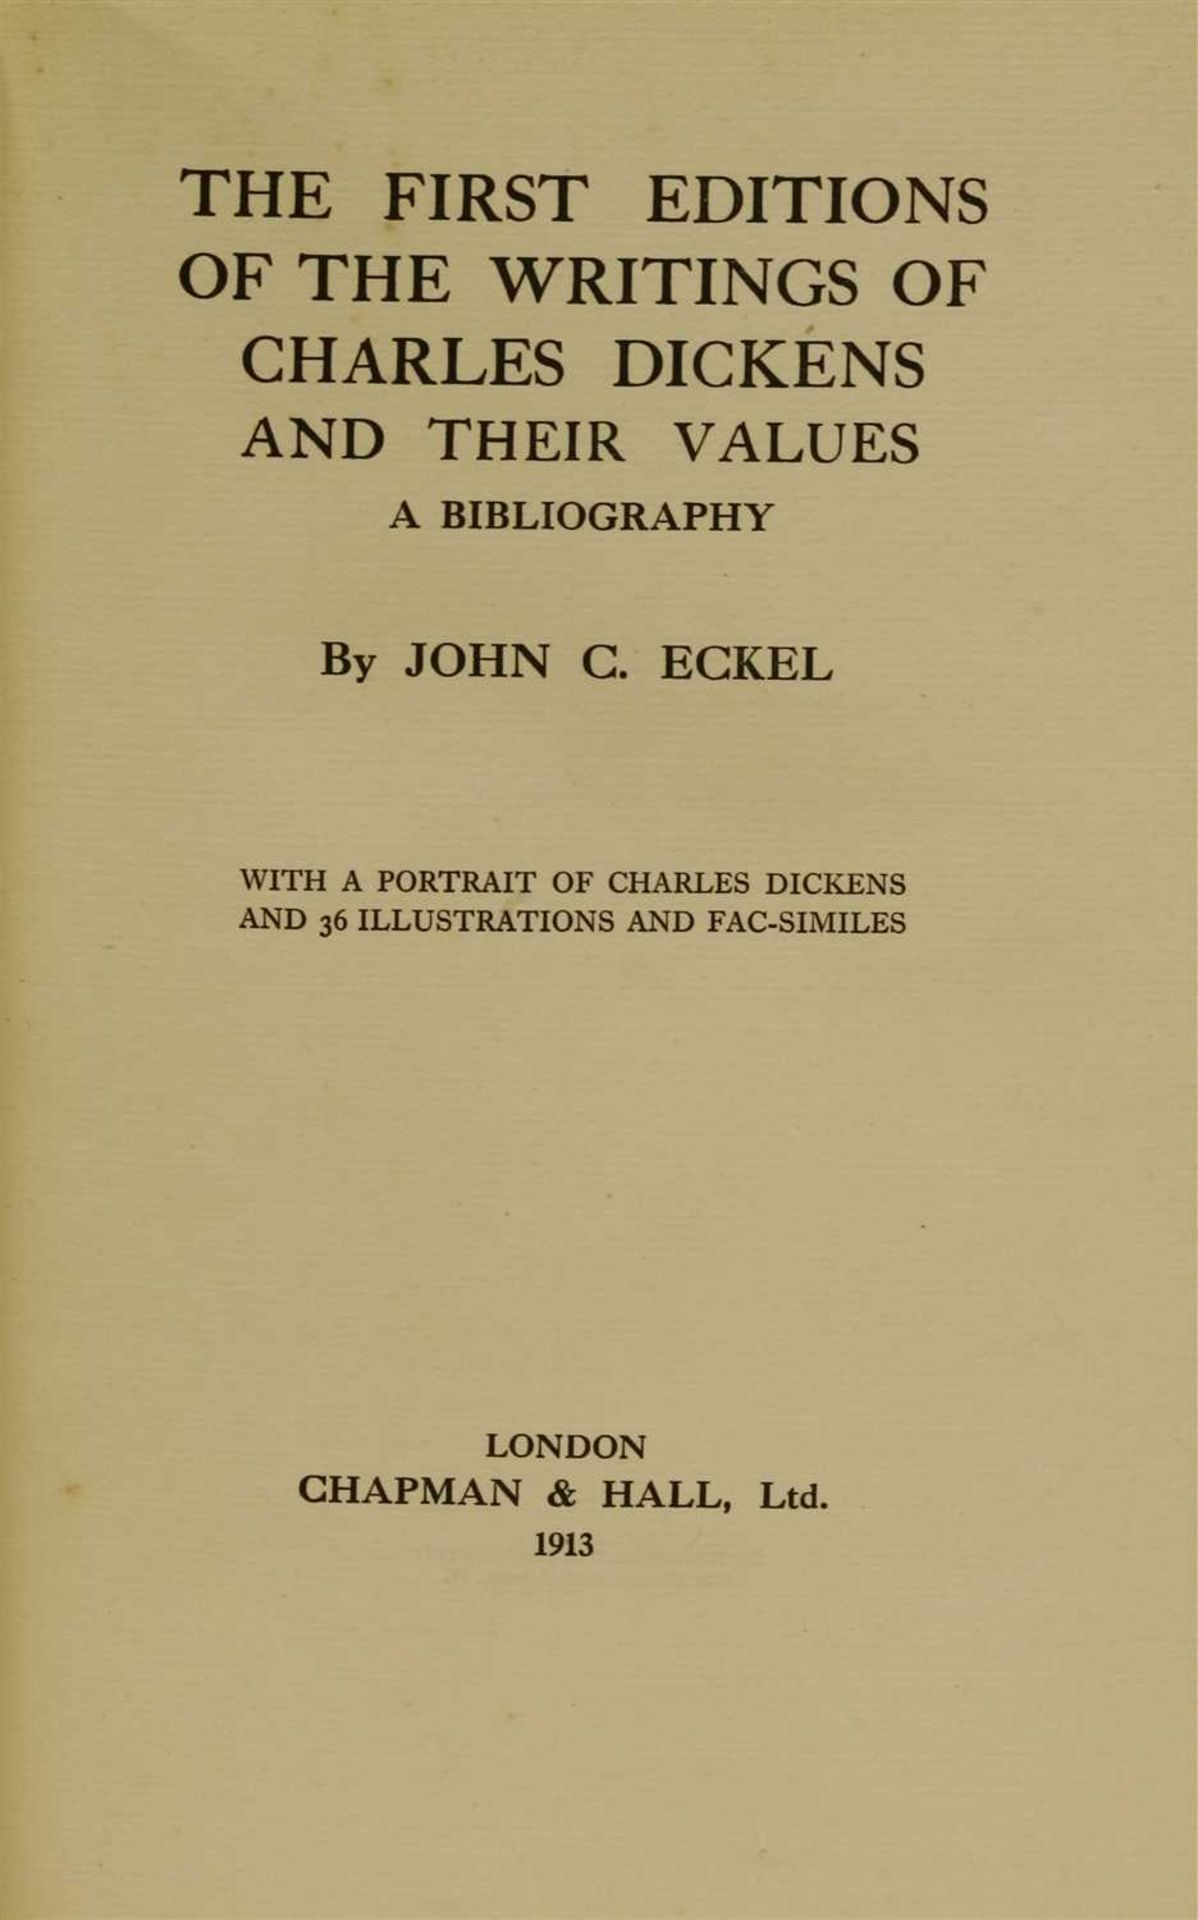 Dickens, C: A collection of First Editions - Image 4 of 4